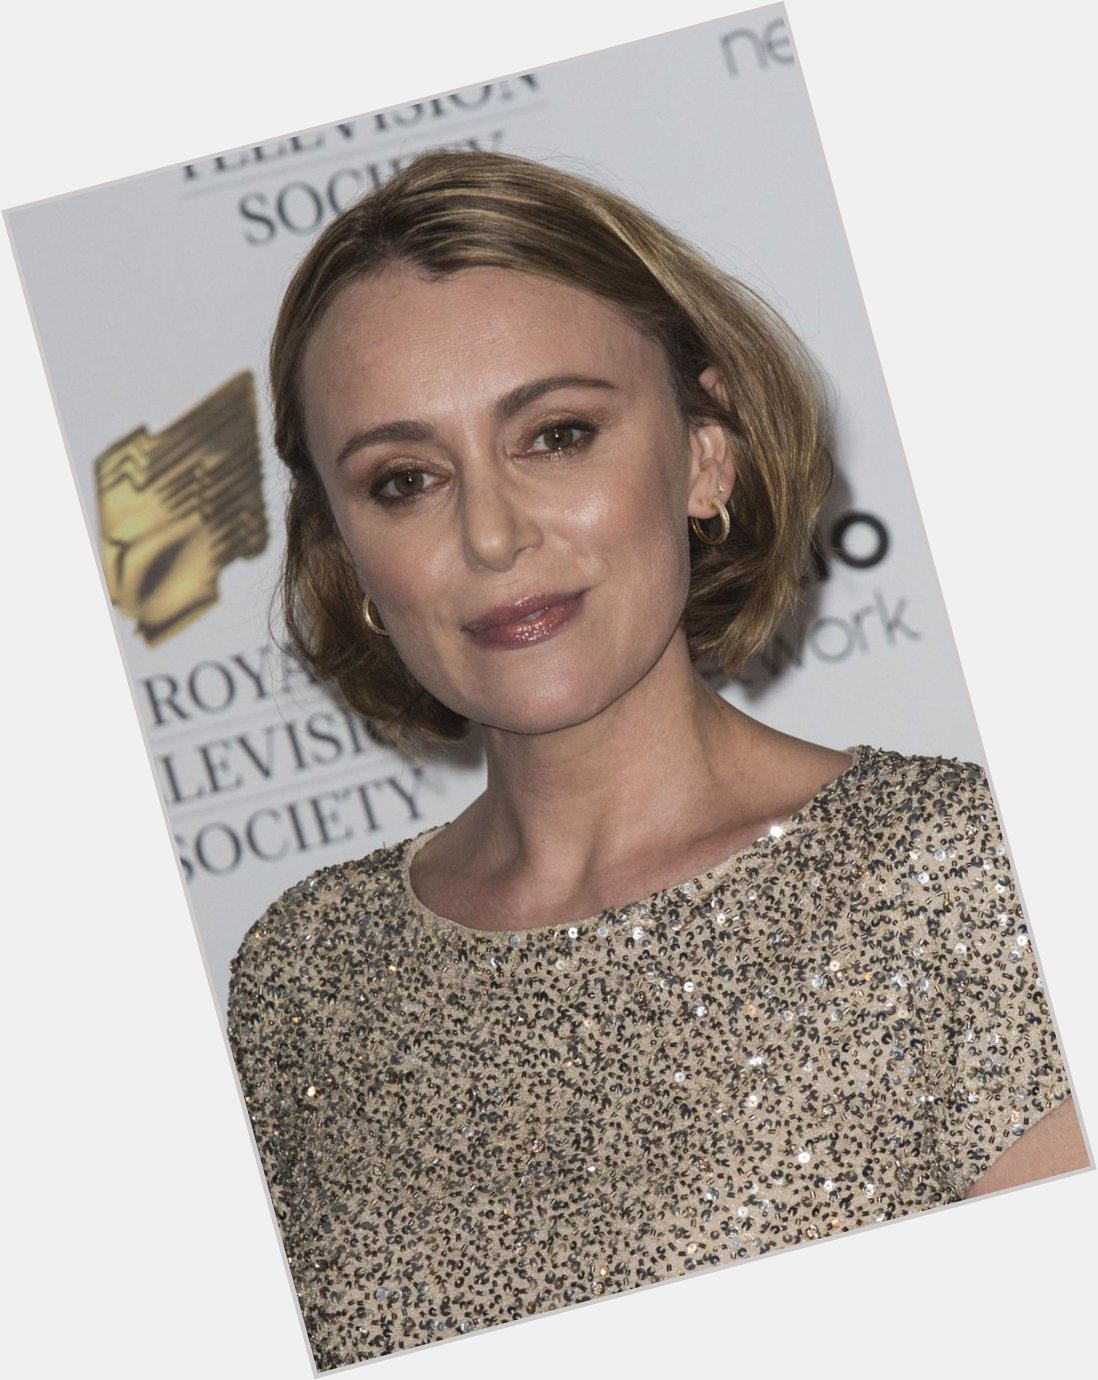 Lots of sexy birthdays today! Happy birthday to the gorgeous Keeley Hawes! 